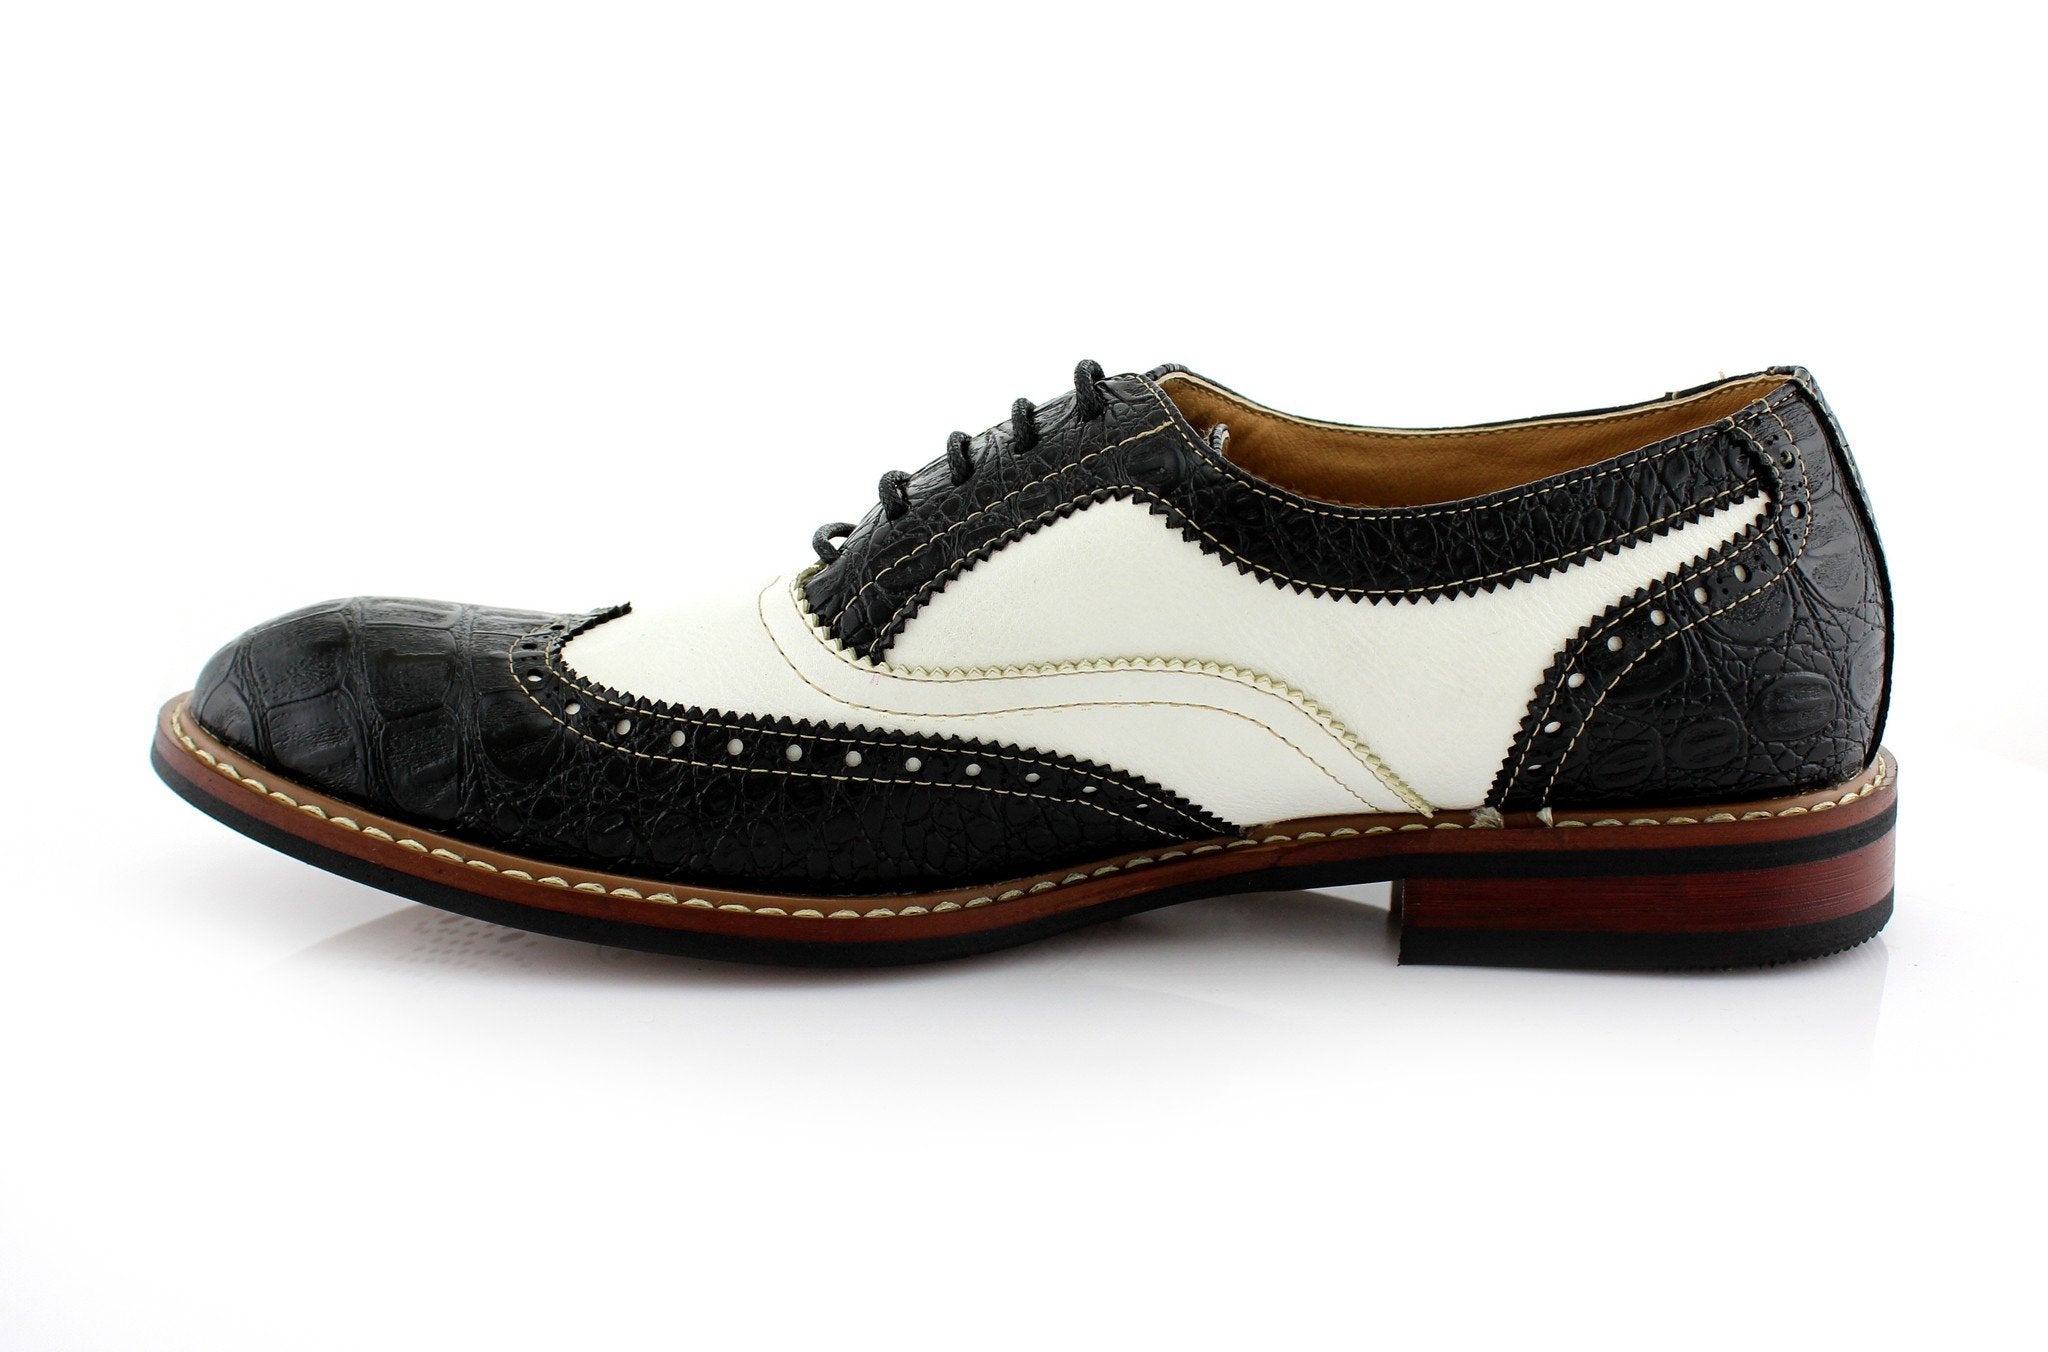 Two-Toned Brogue Wingtip Oxfords | Cooper by Ferro Aldo | Conal Footwear | Inner Side Angle View